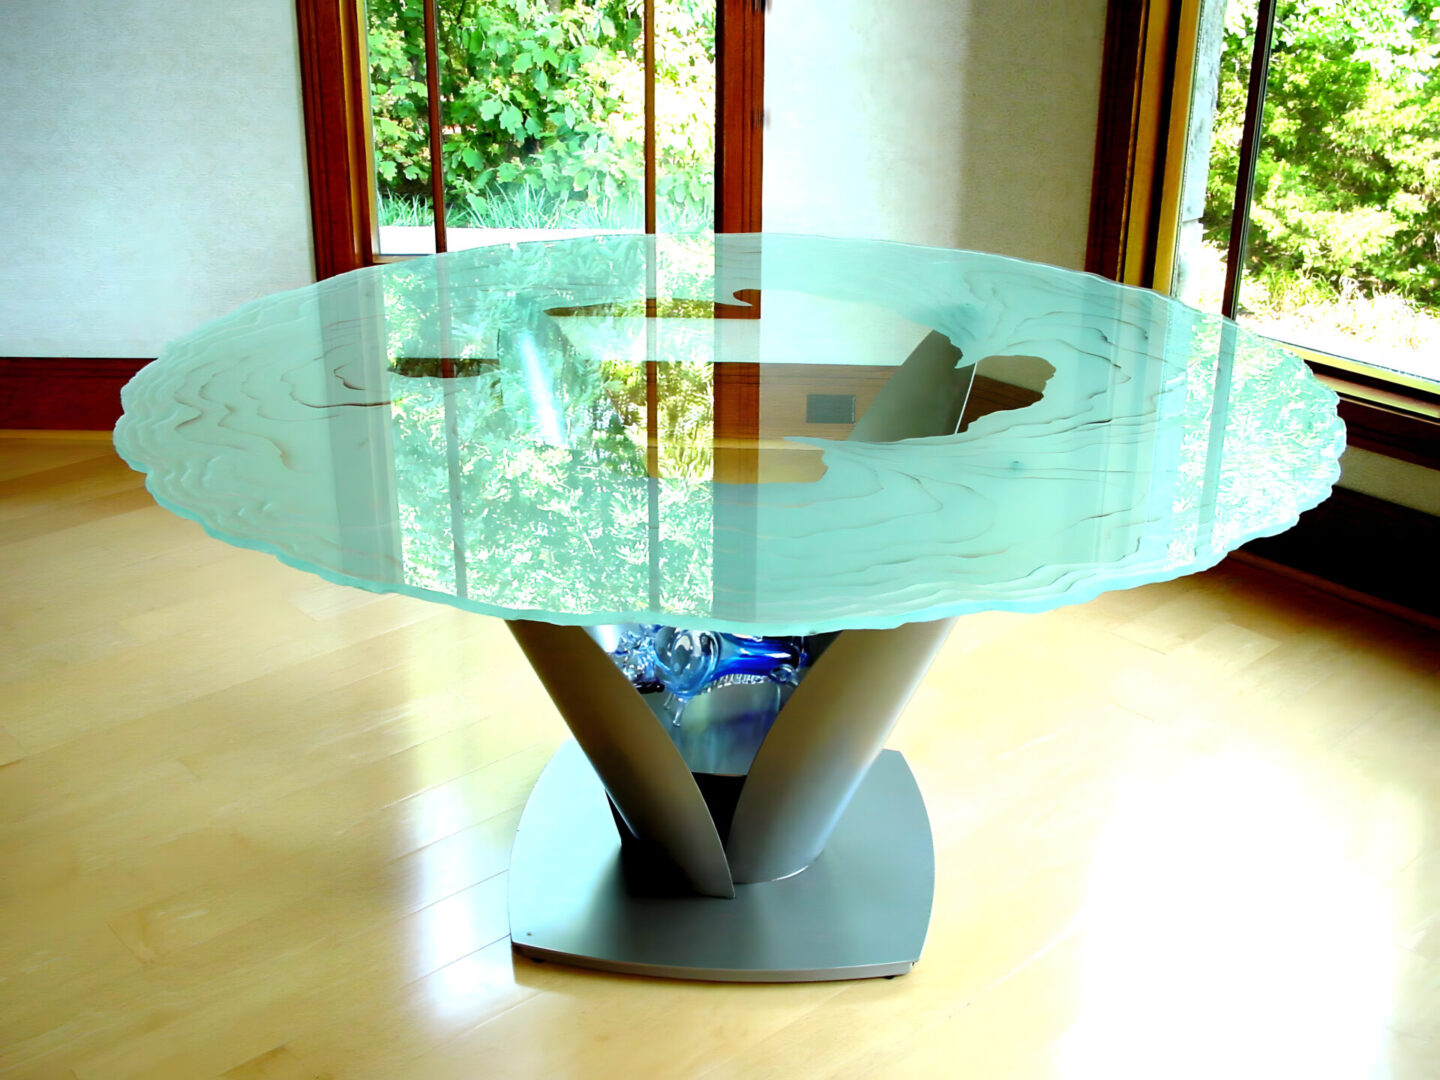 A modern glass-top table with a unique base design, placed in a room with wooden flooring and large windows.